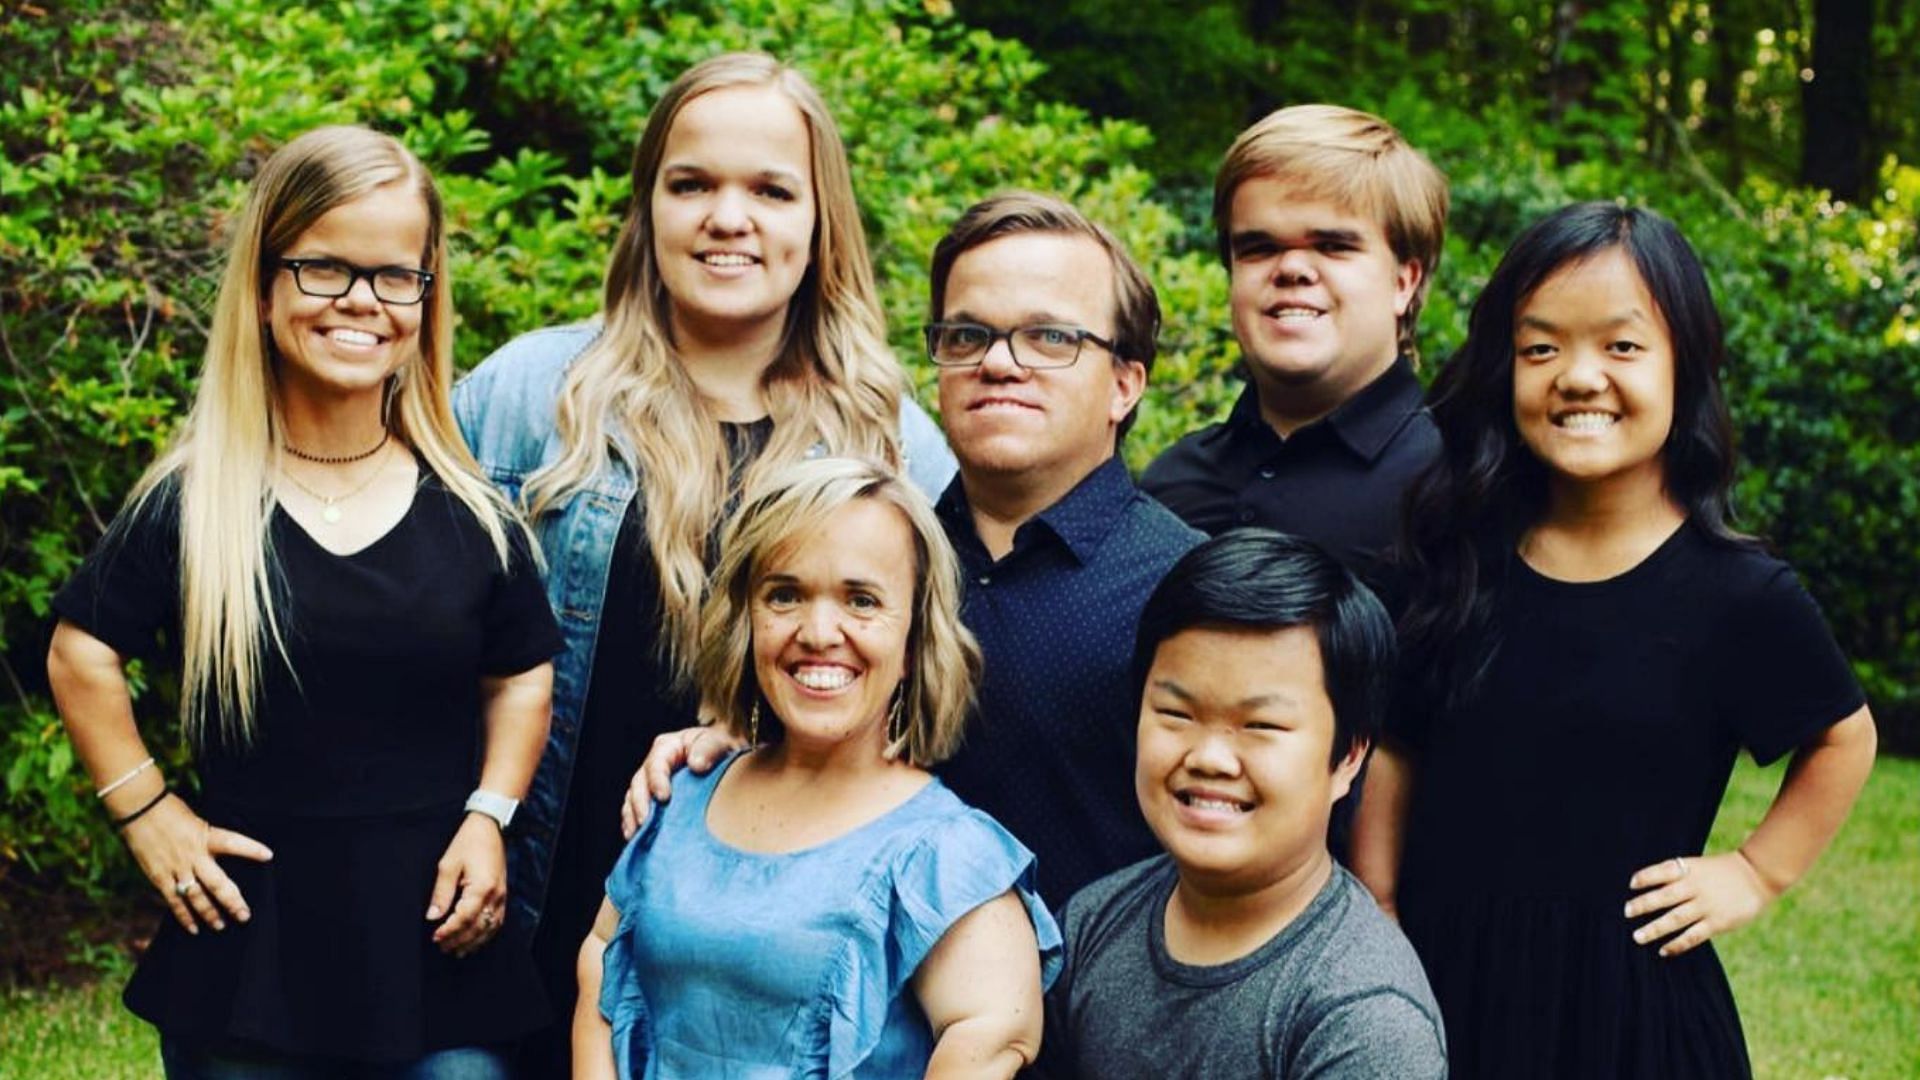 7 Little Johnstons airs on Tuesdays on TLC